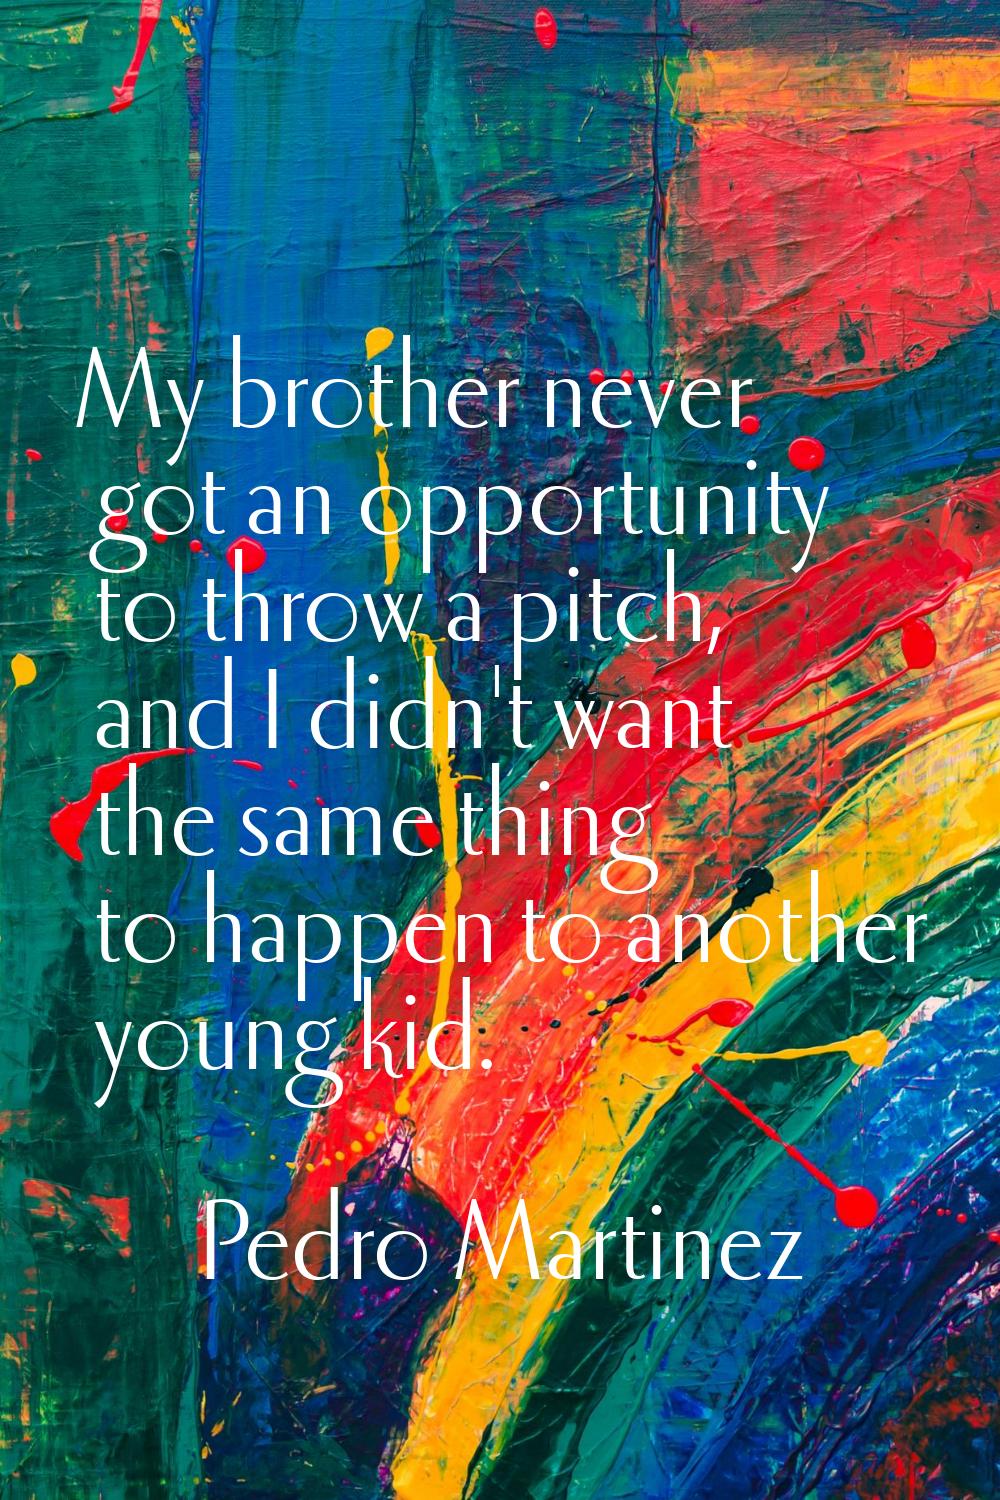 My brother never got an opportunity to throw a pitch, and I didn't want the same thing to happen to